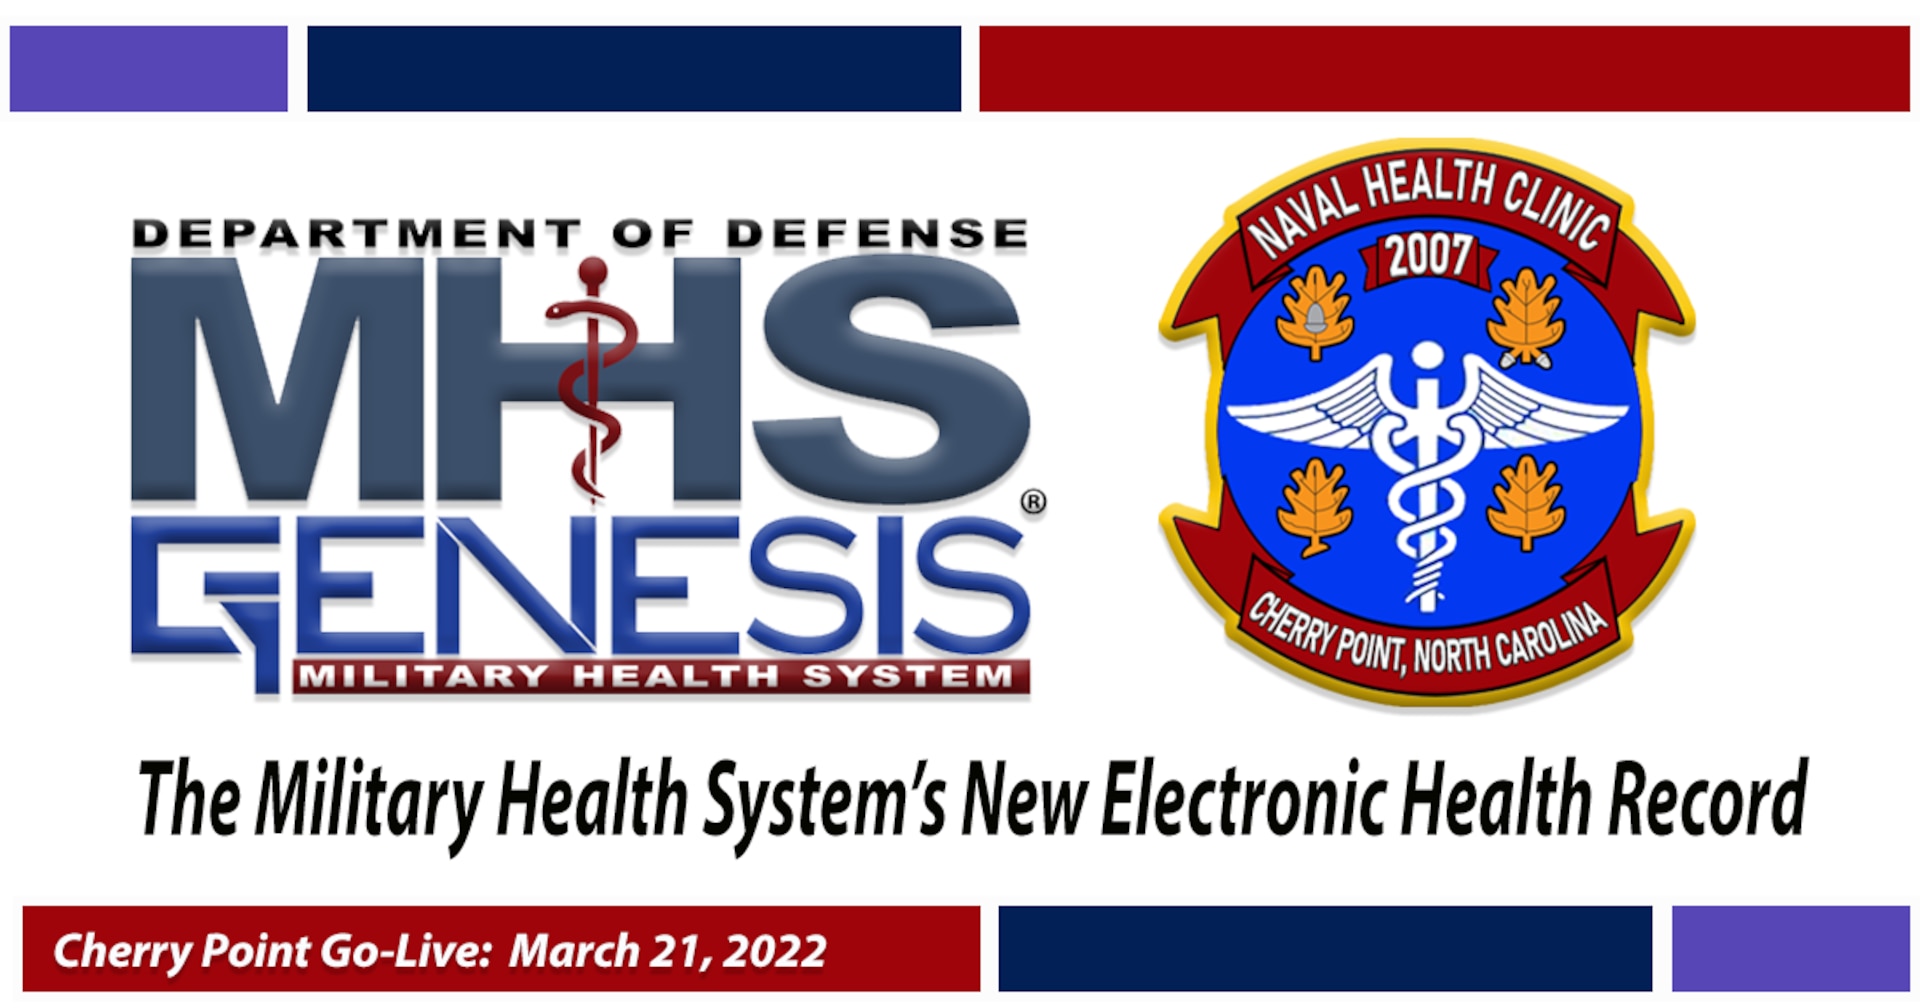 Captain Elizabeth Adriano, Commander of Naval Health Clinic Cherry Point, invites you to participate in one of two Facebook Townhall Live events to learn more about the implementation of MHS Genesis aboard the facility.